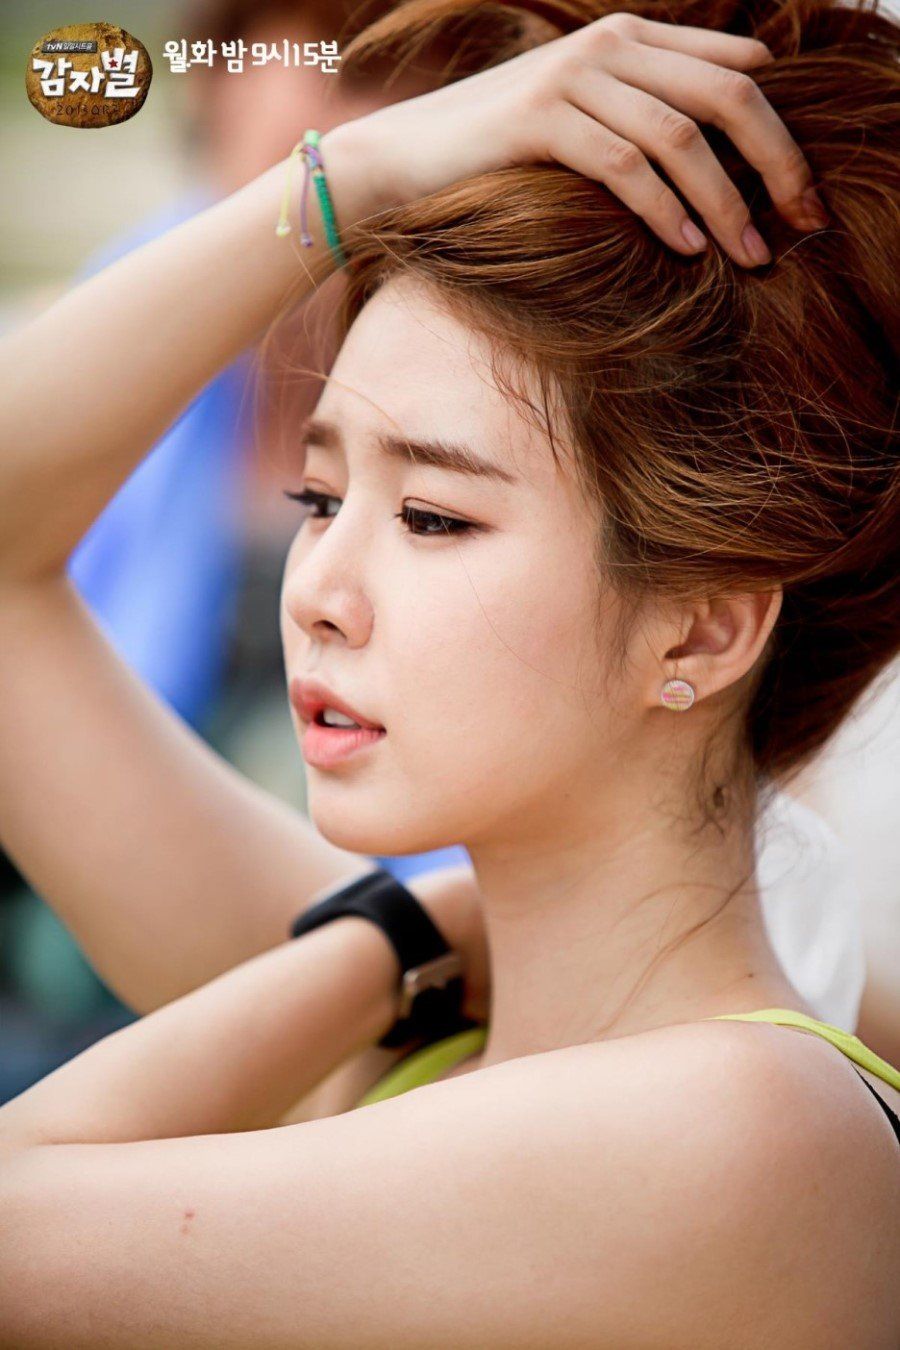 50 Yoo In-na Nude Pictures Are Sure To Keep You Motivated 24